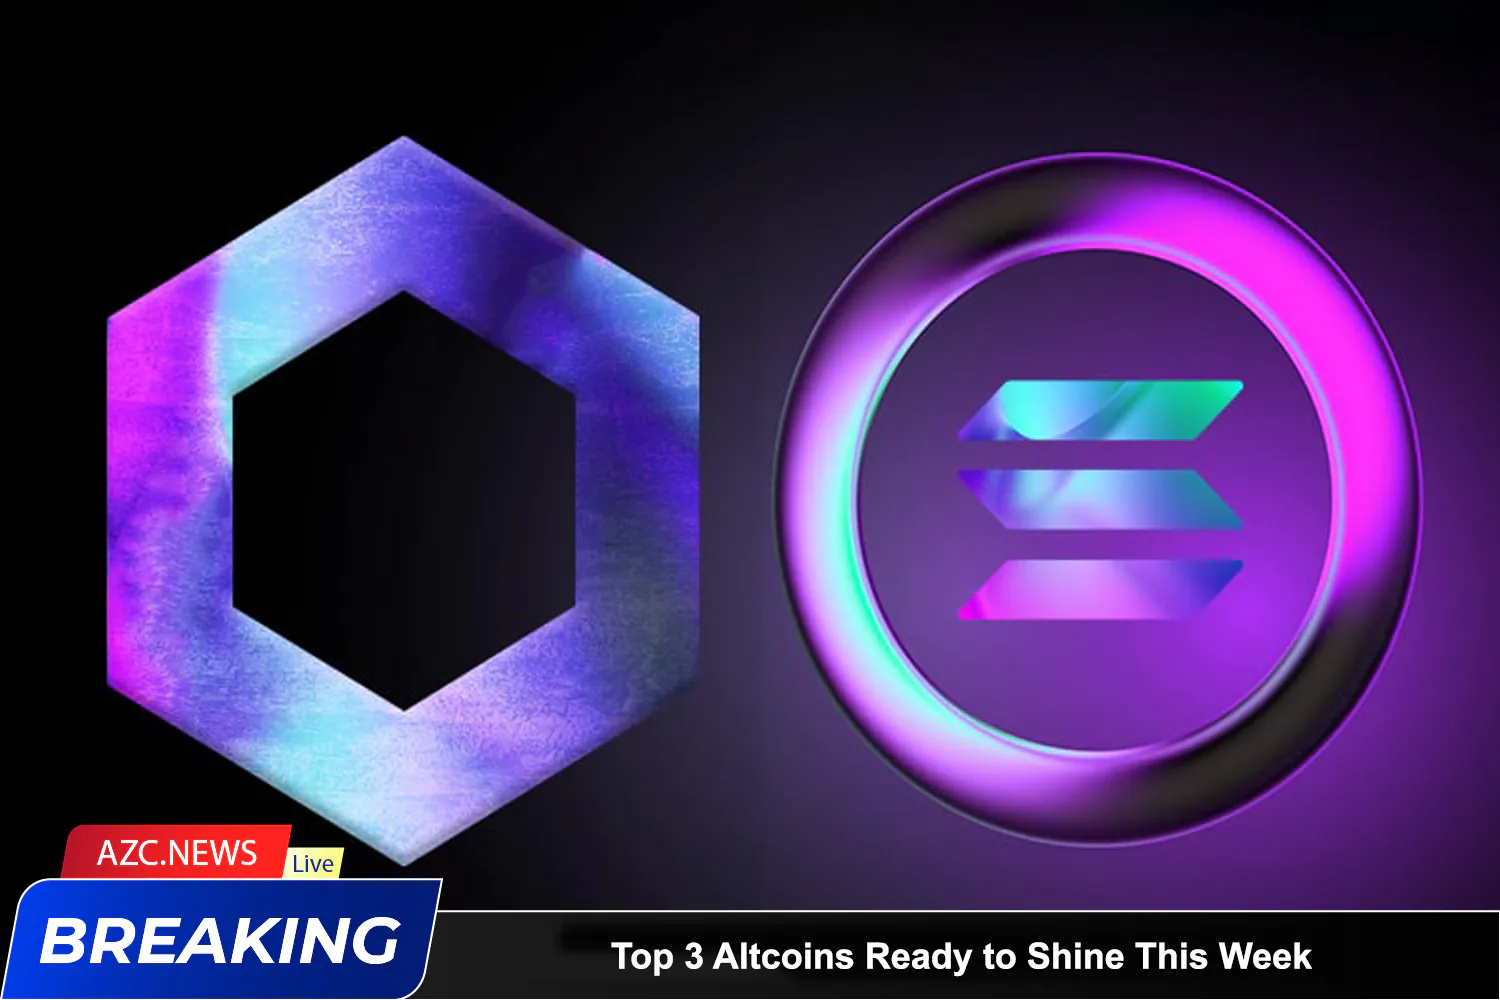 Azcnews Top 3 Altcoins Ready To Shine This Week